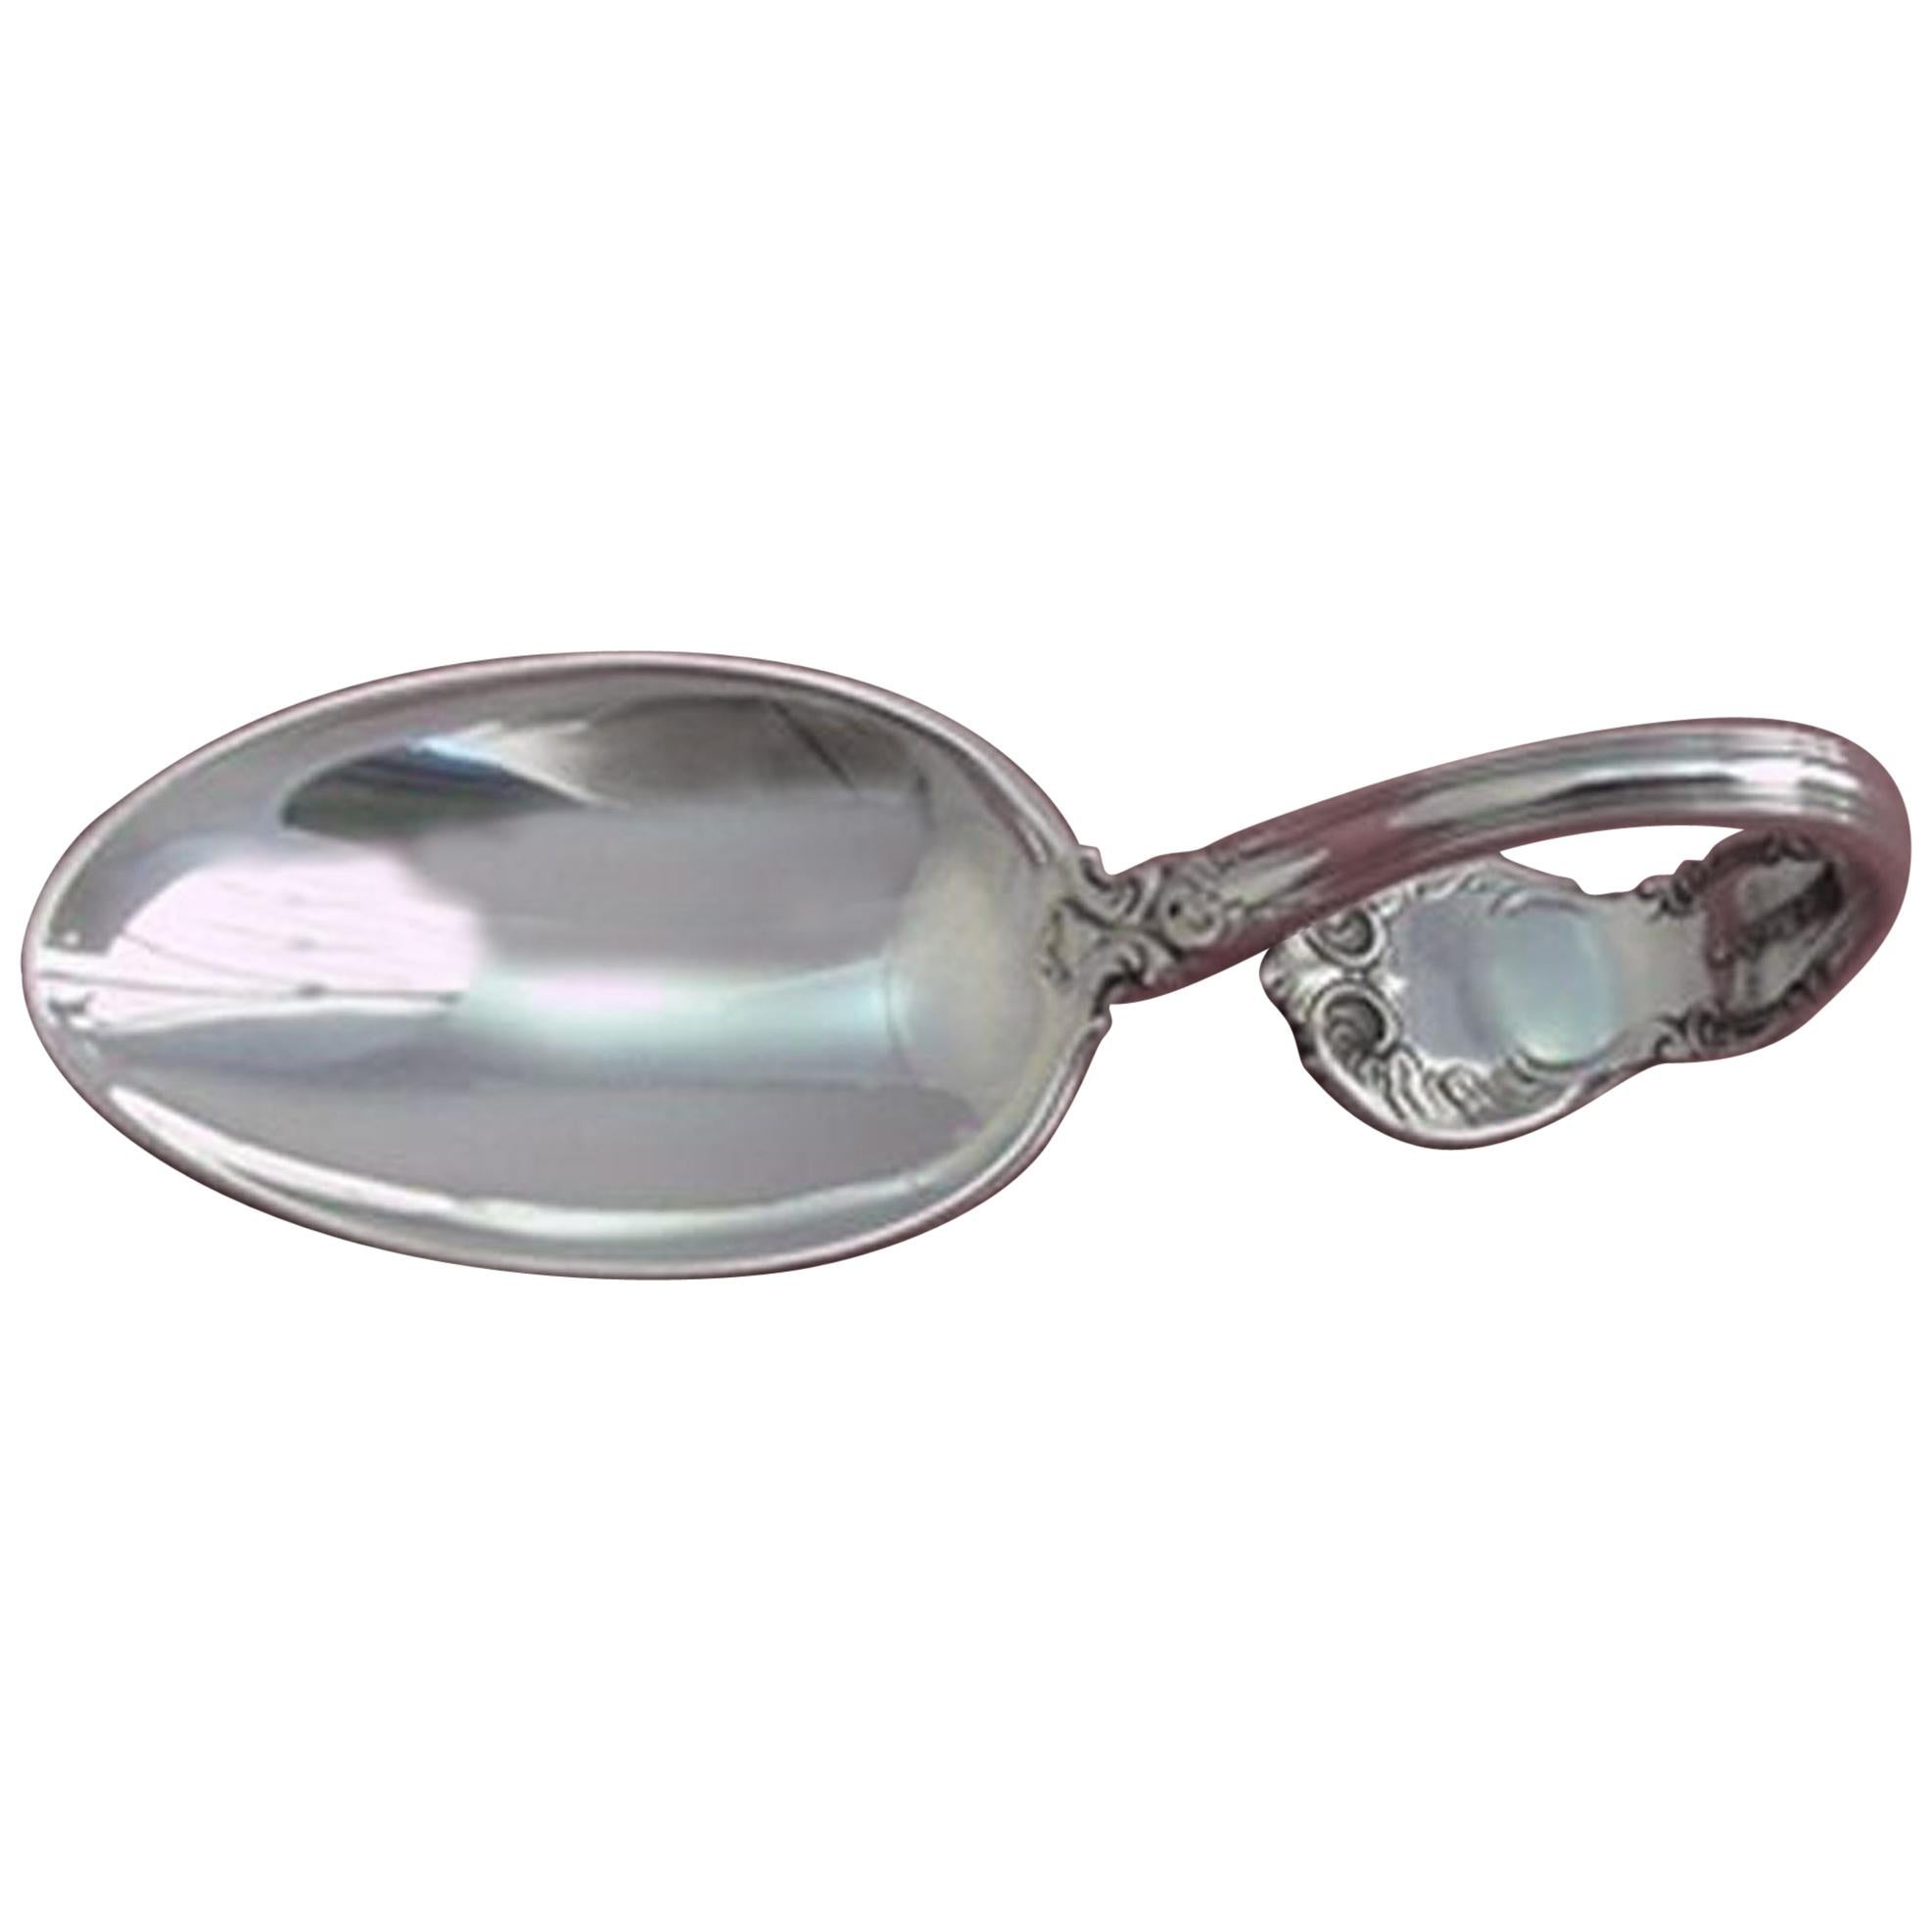 San Lorenzo by Tiffany & Co. Sterling Baby Spoon Custom Made to Order